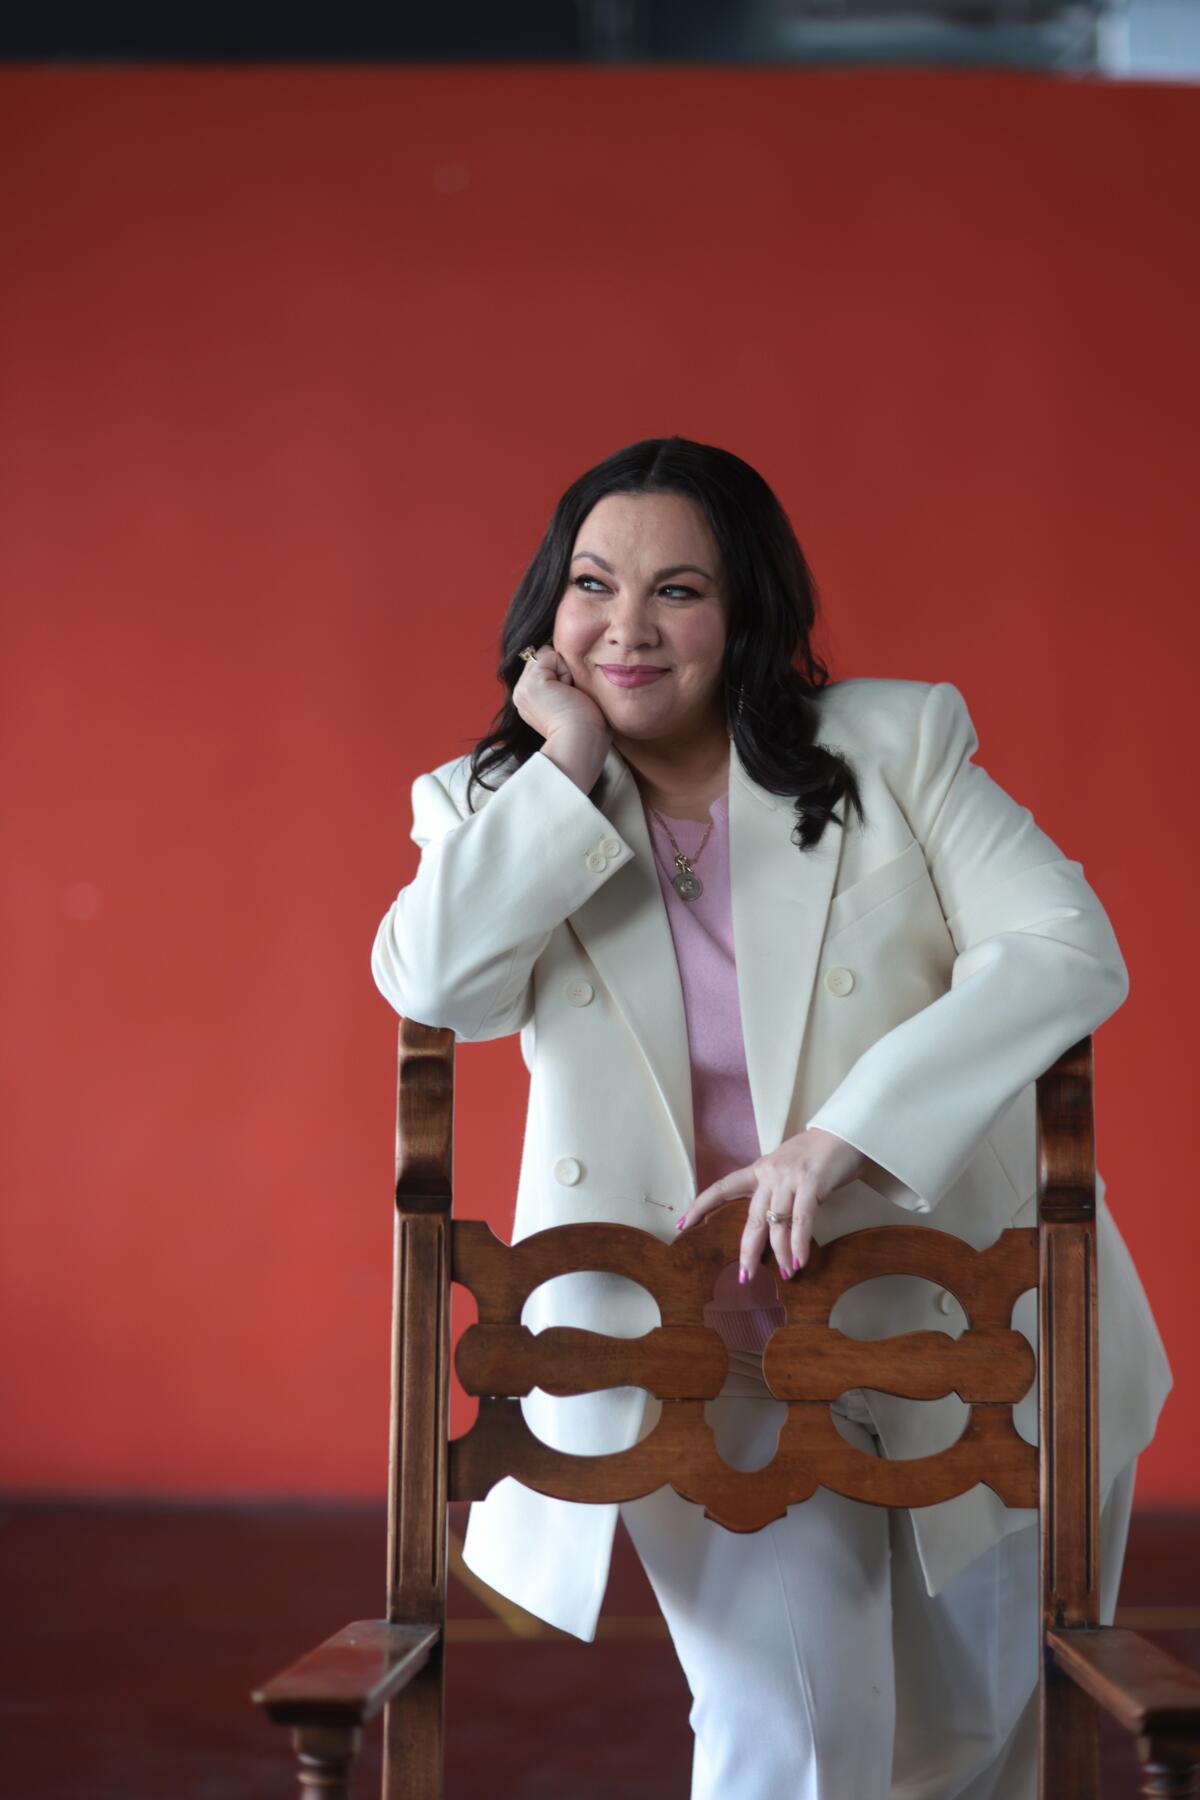 Gloria Caldern Kellett, a smiling Latine woman with black hair, wears a white suit and leans on a chair.